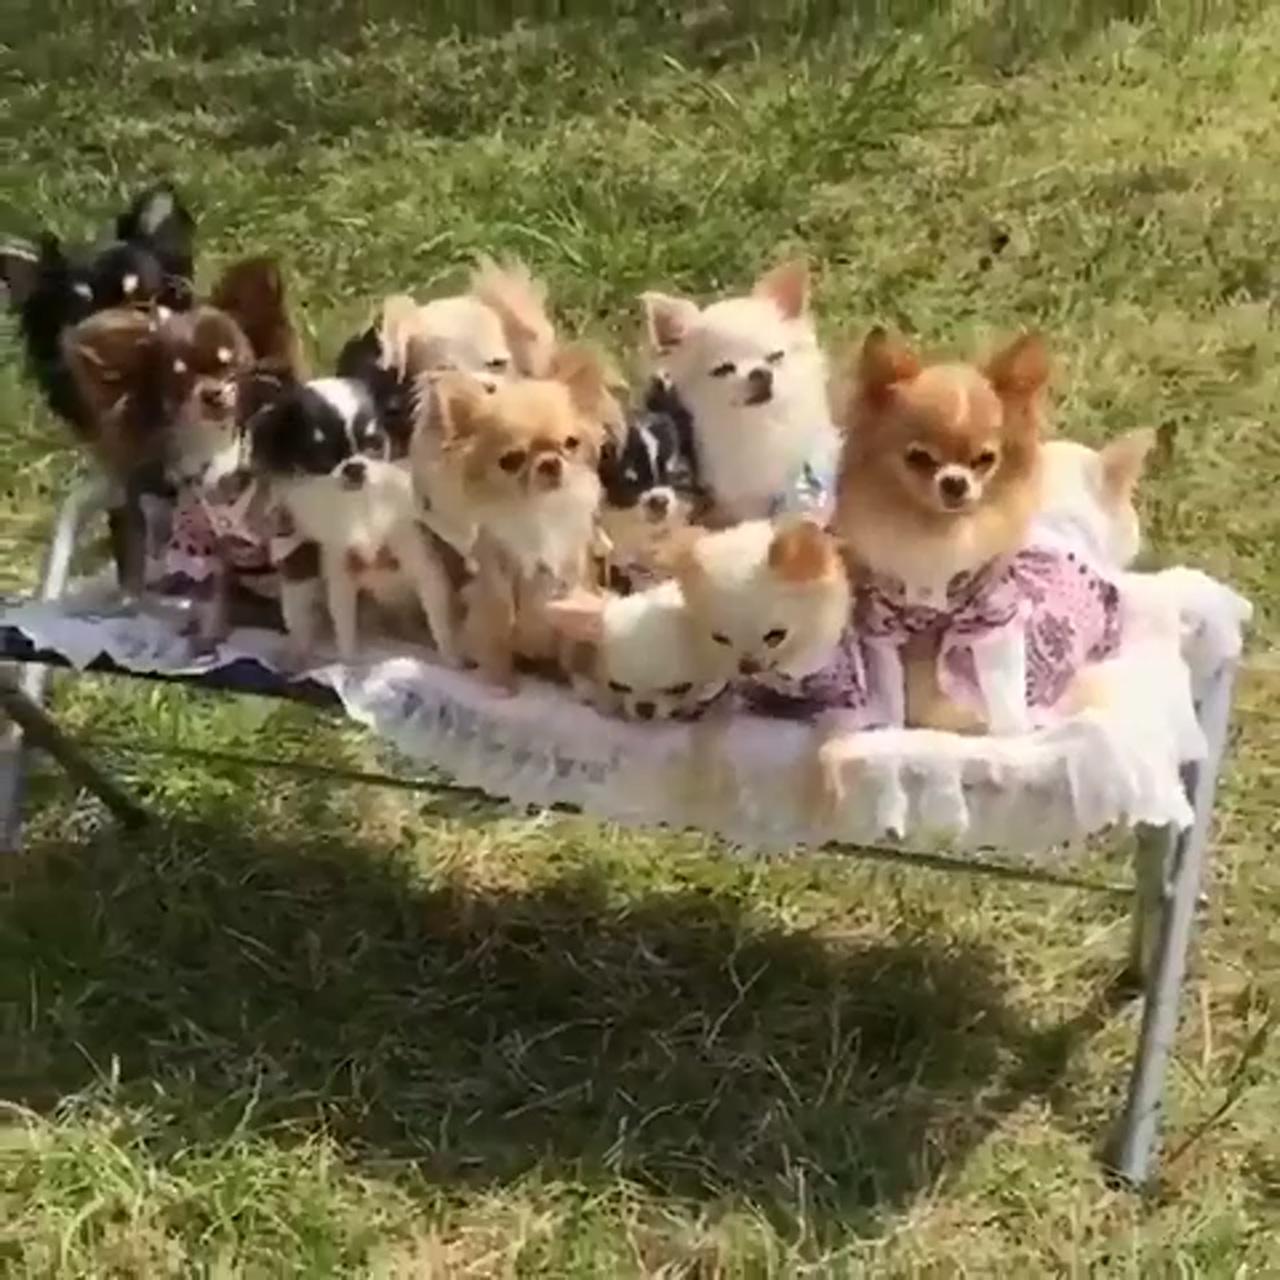 Cute animals; cute baby dogs